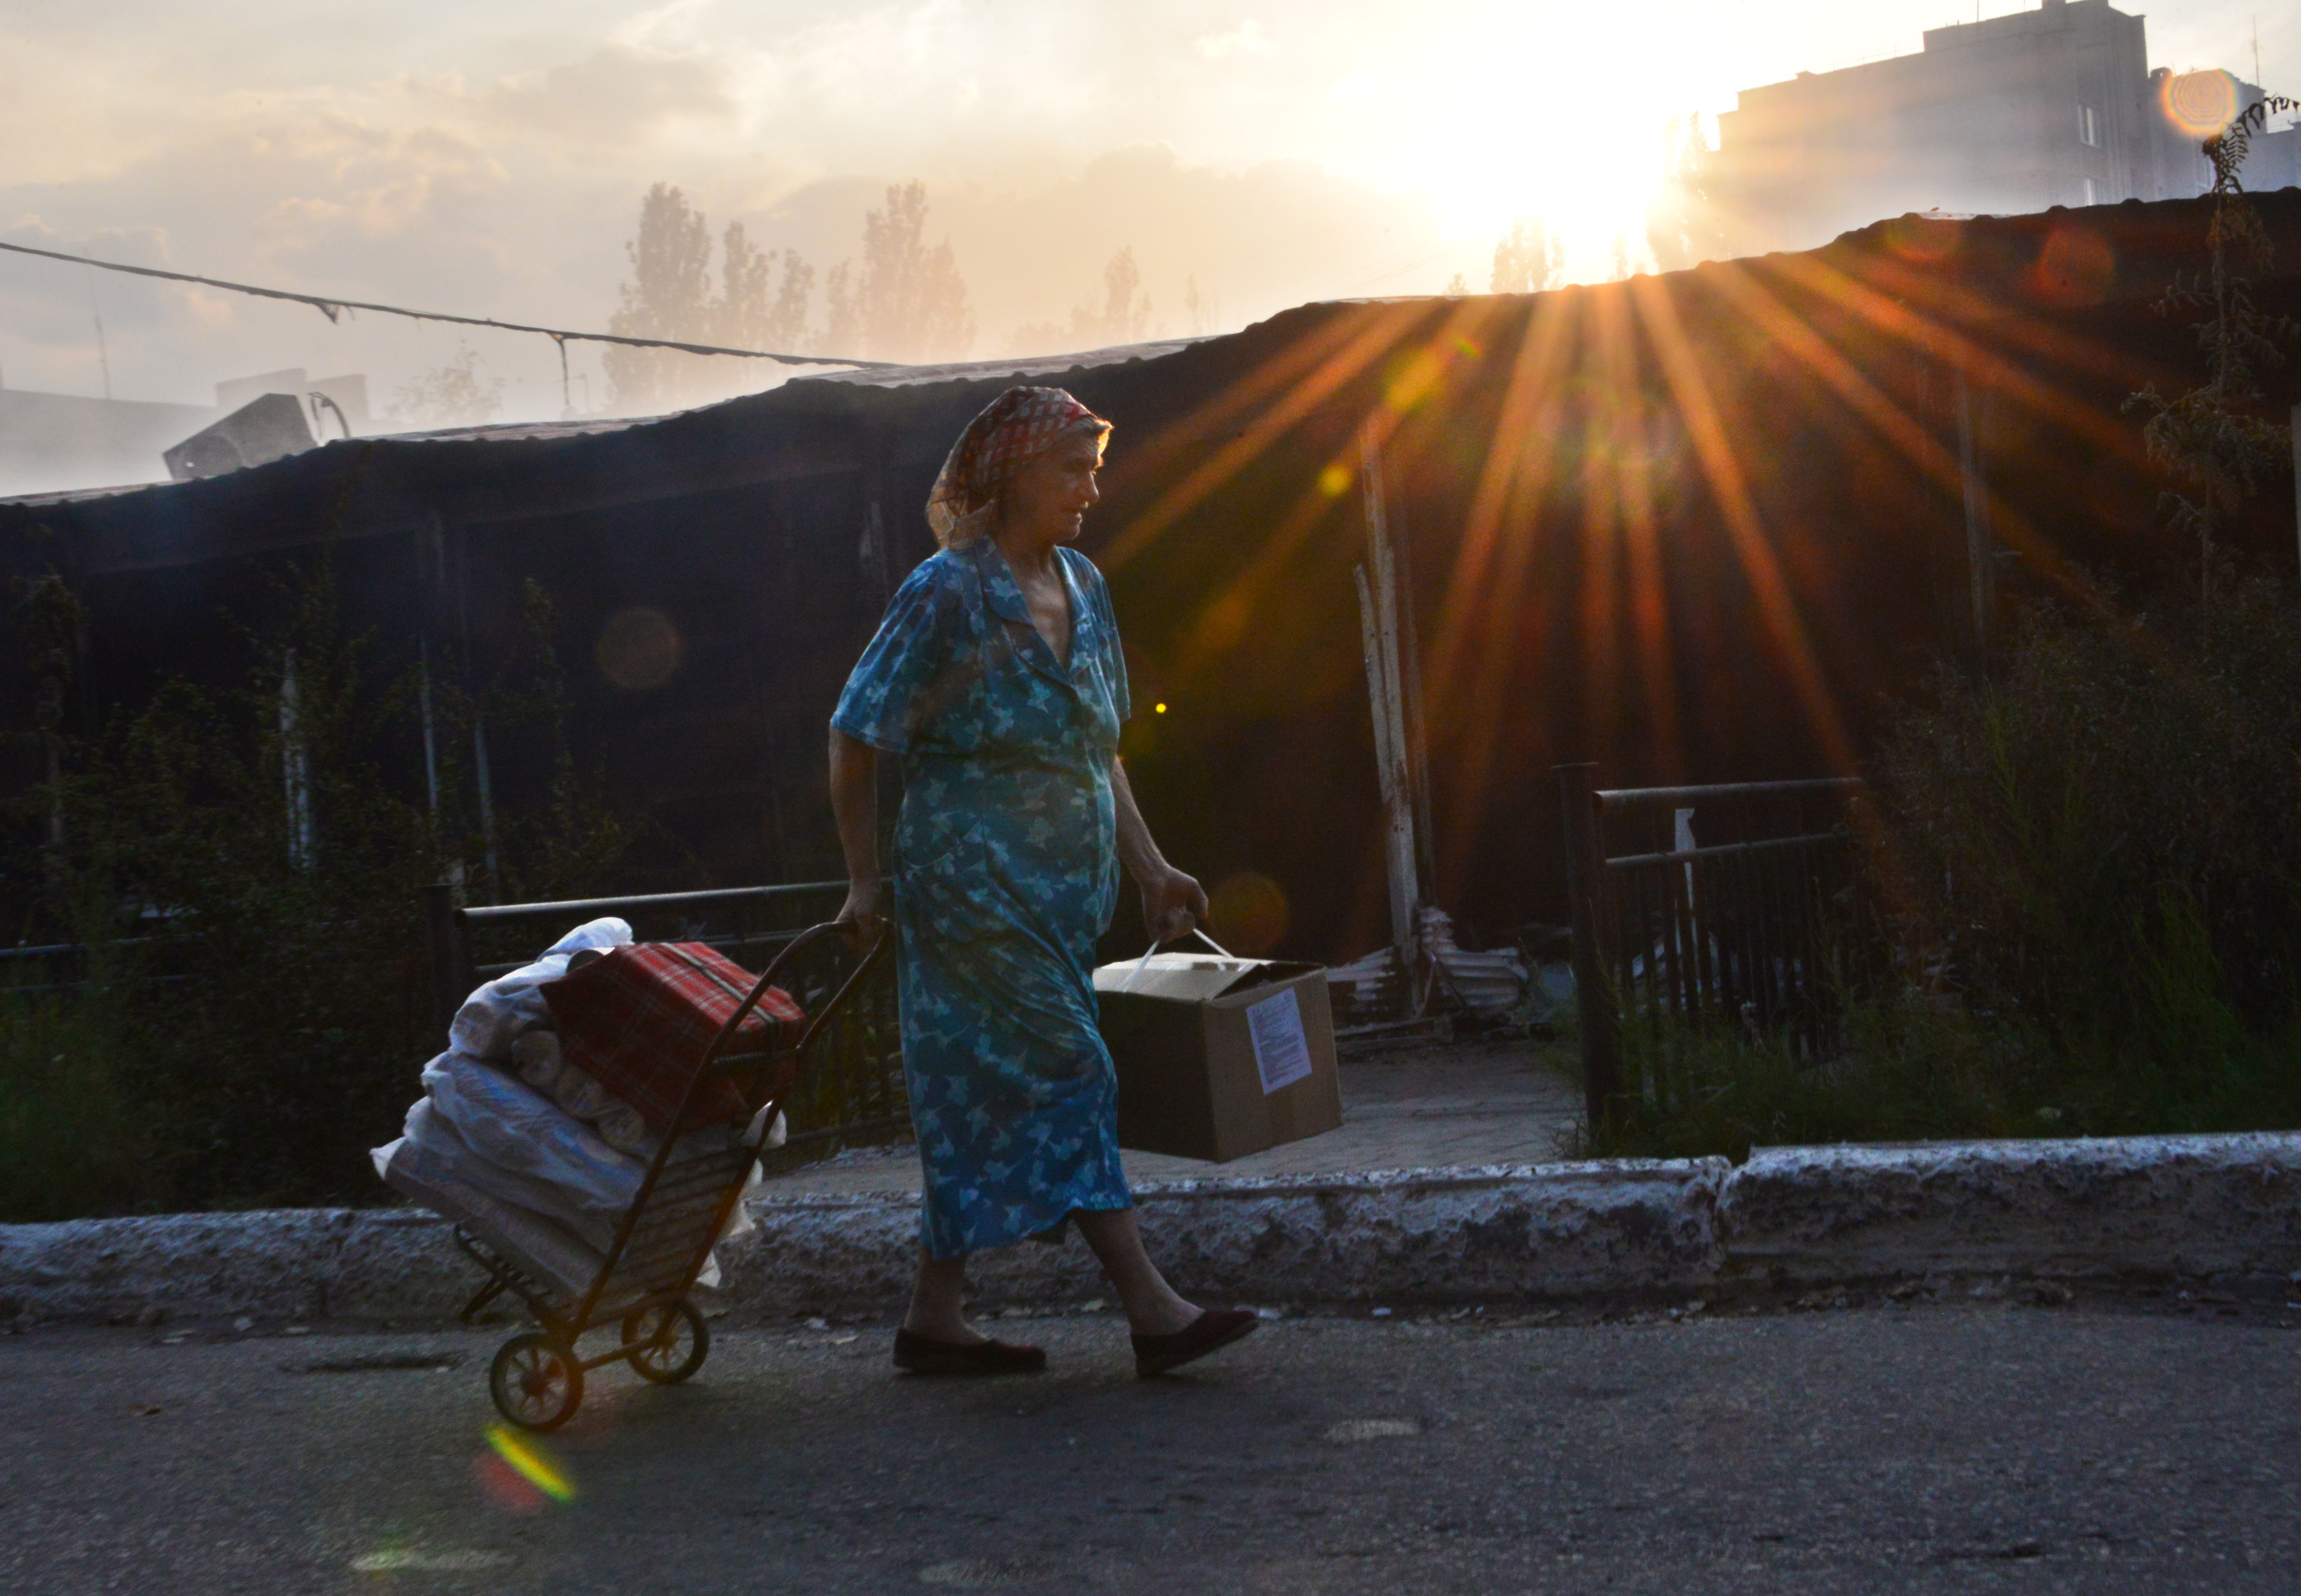 A woman walks by a burning local market after shelling in the town of Yasynuvata, near the rebel stronghold of Donetsk, eastern Ukraine on August 12, 2014.